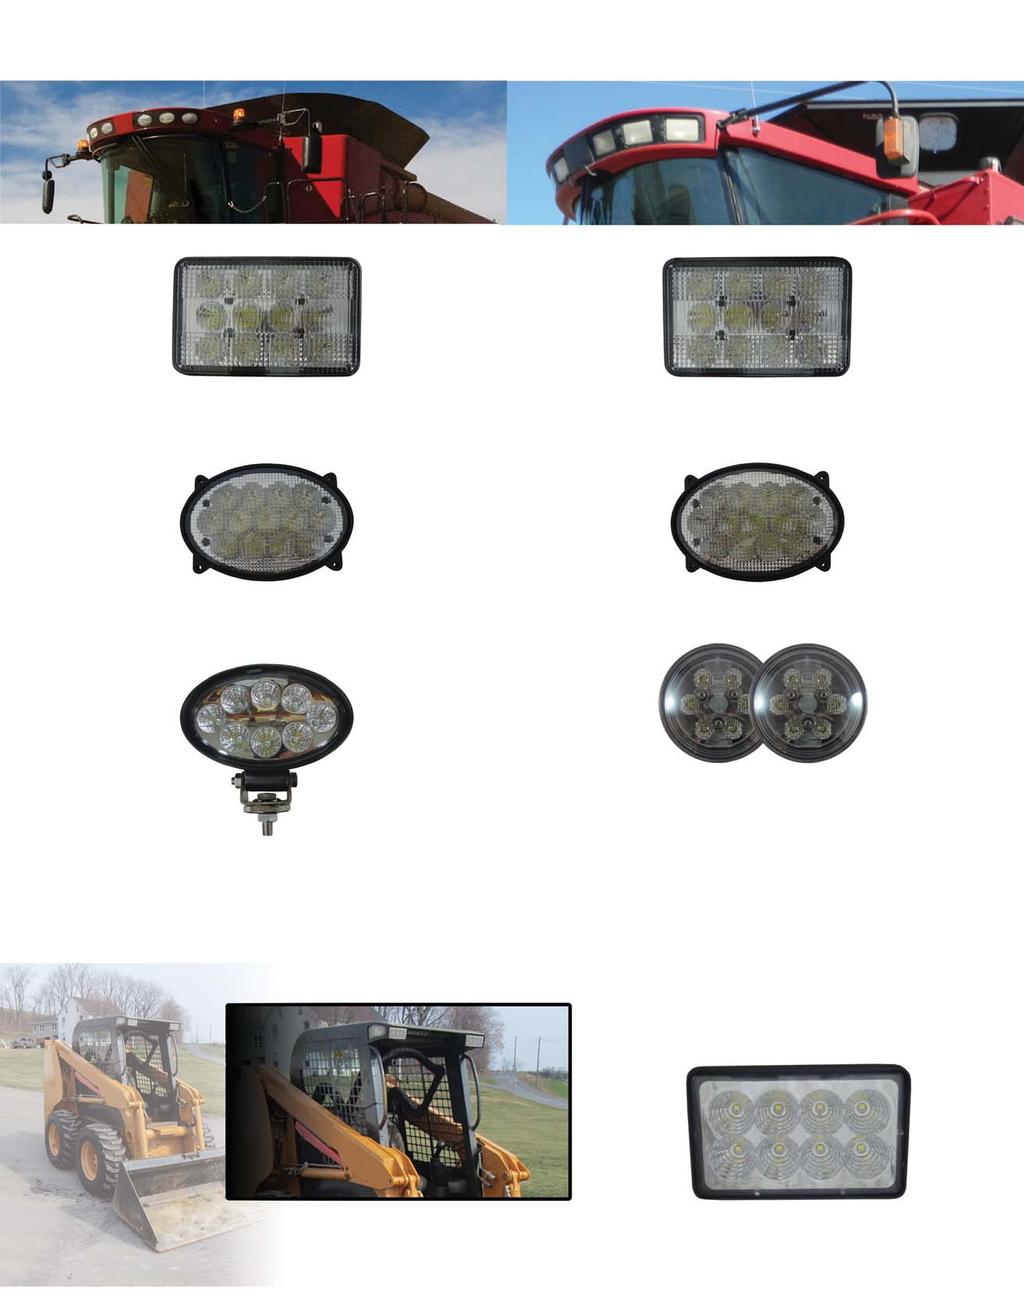 LED Lights to fit International/CaseIH Combines WN-353656A1 $98.